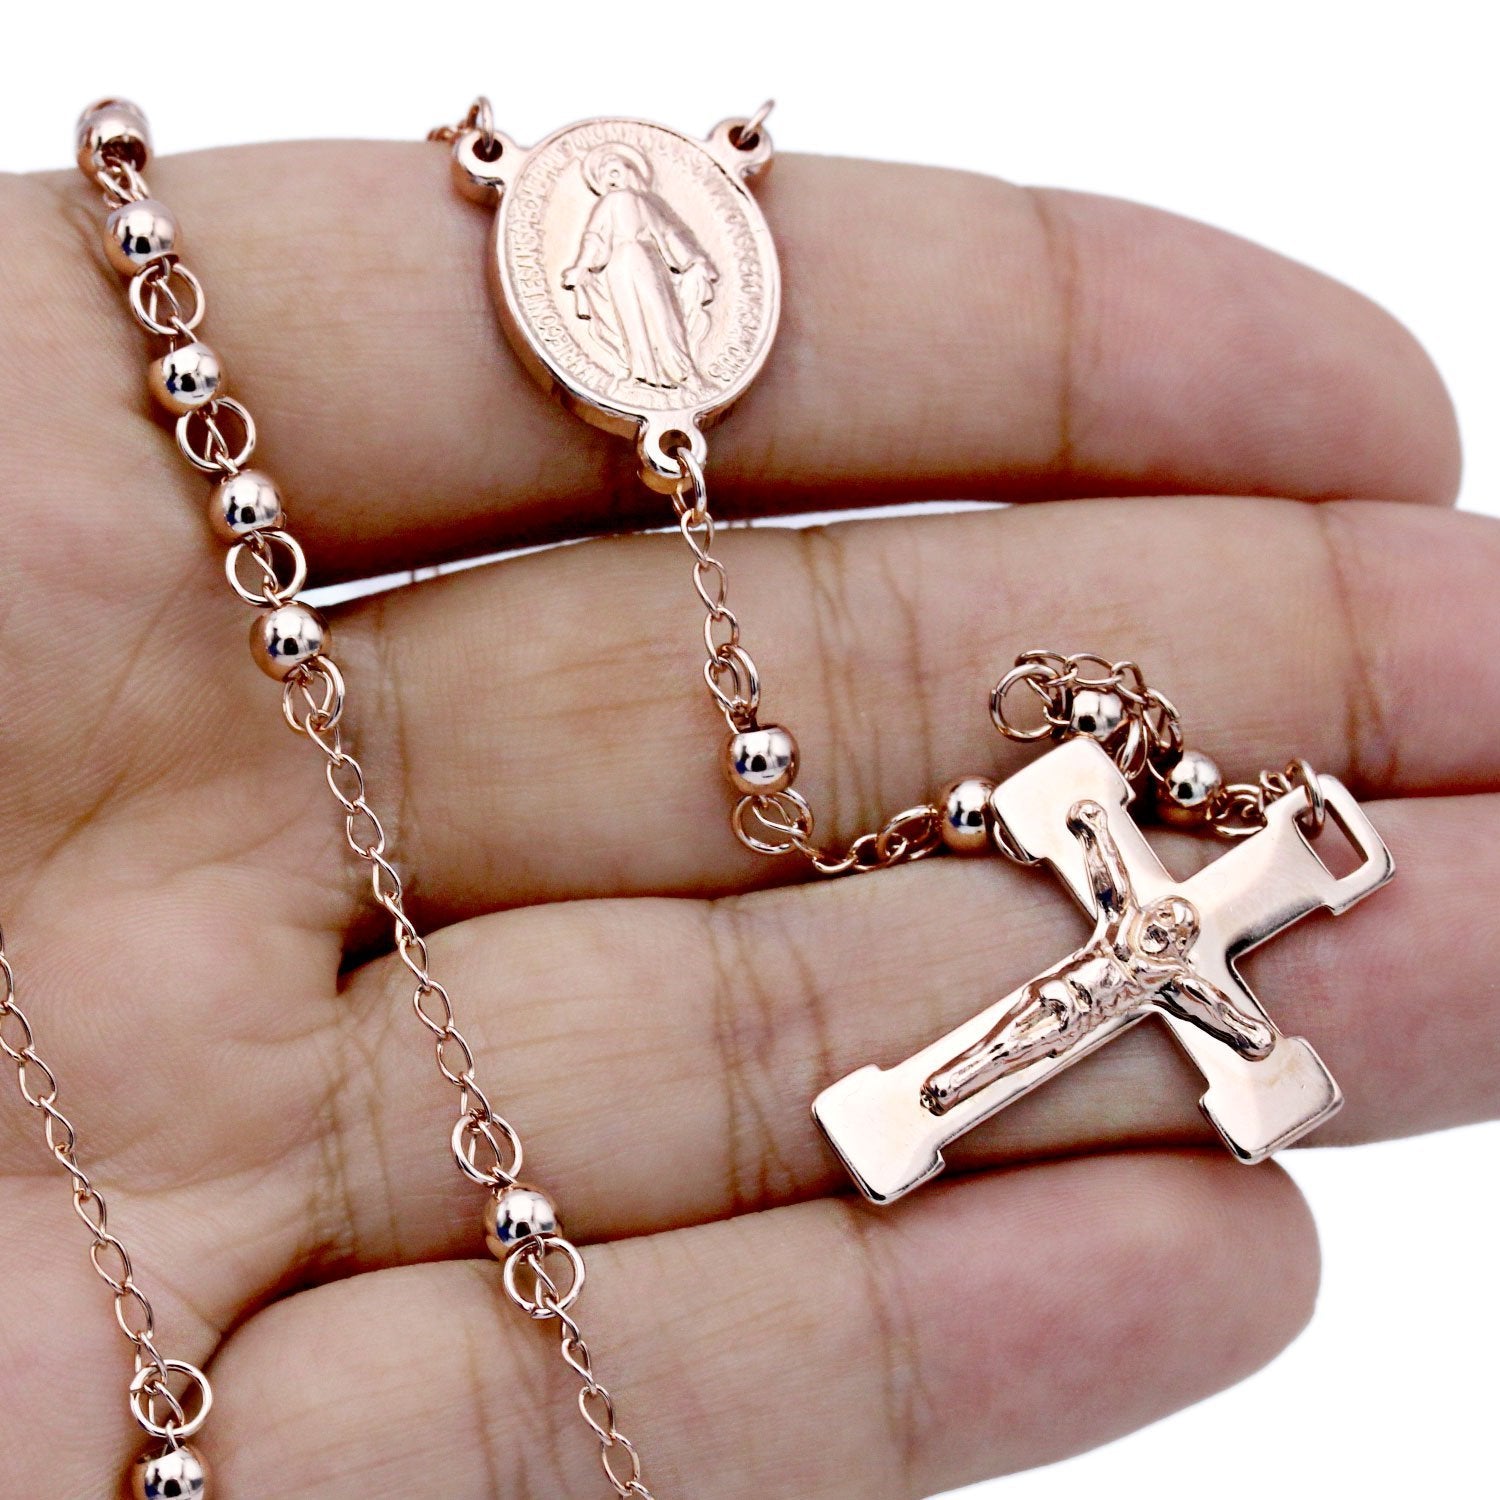 Traditional Rose Gold Rosary Necklace Five Decade Catholic Prayer Beads 4mm